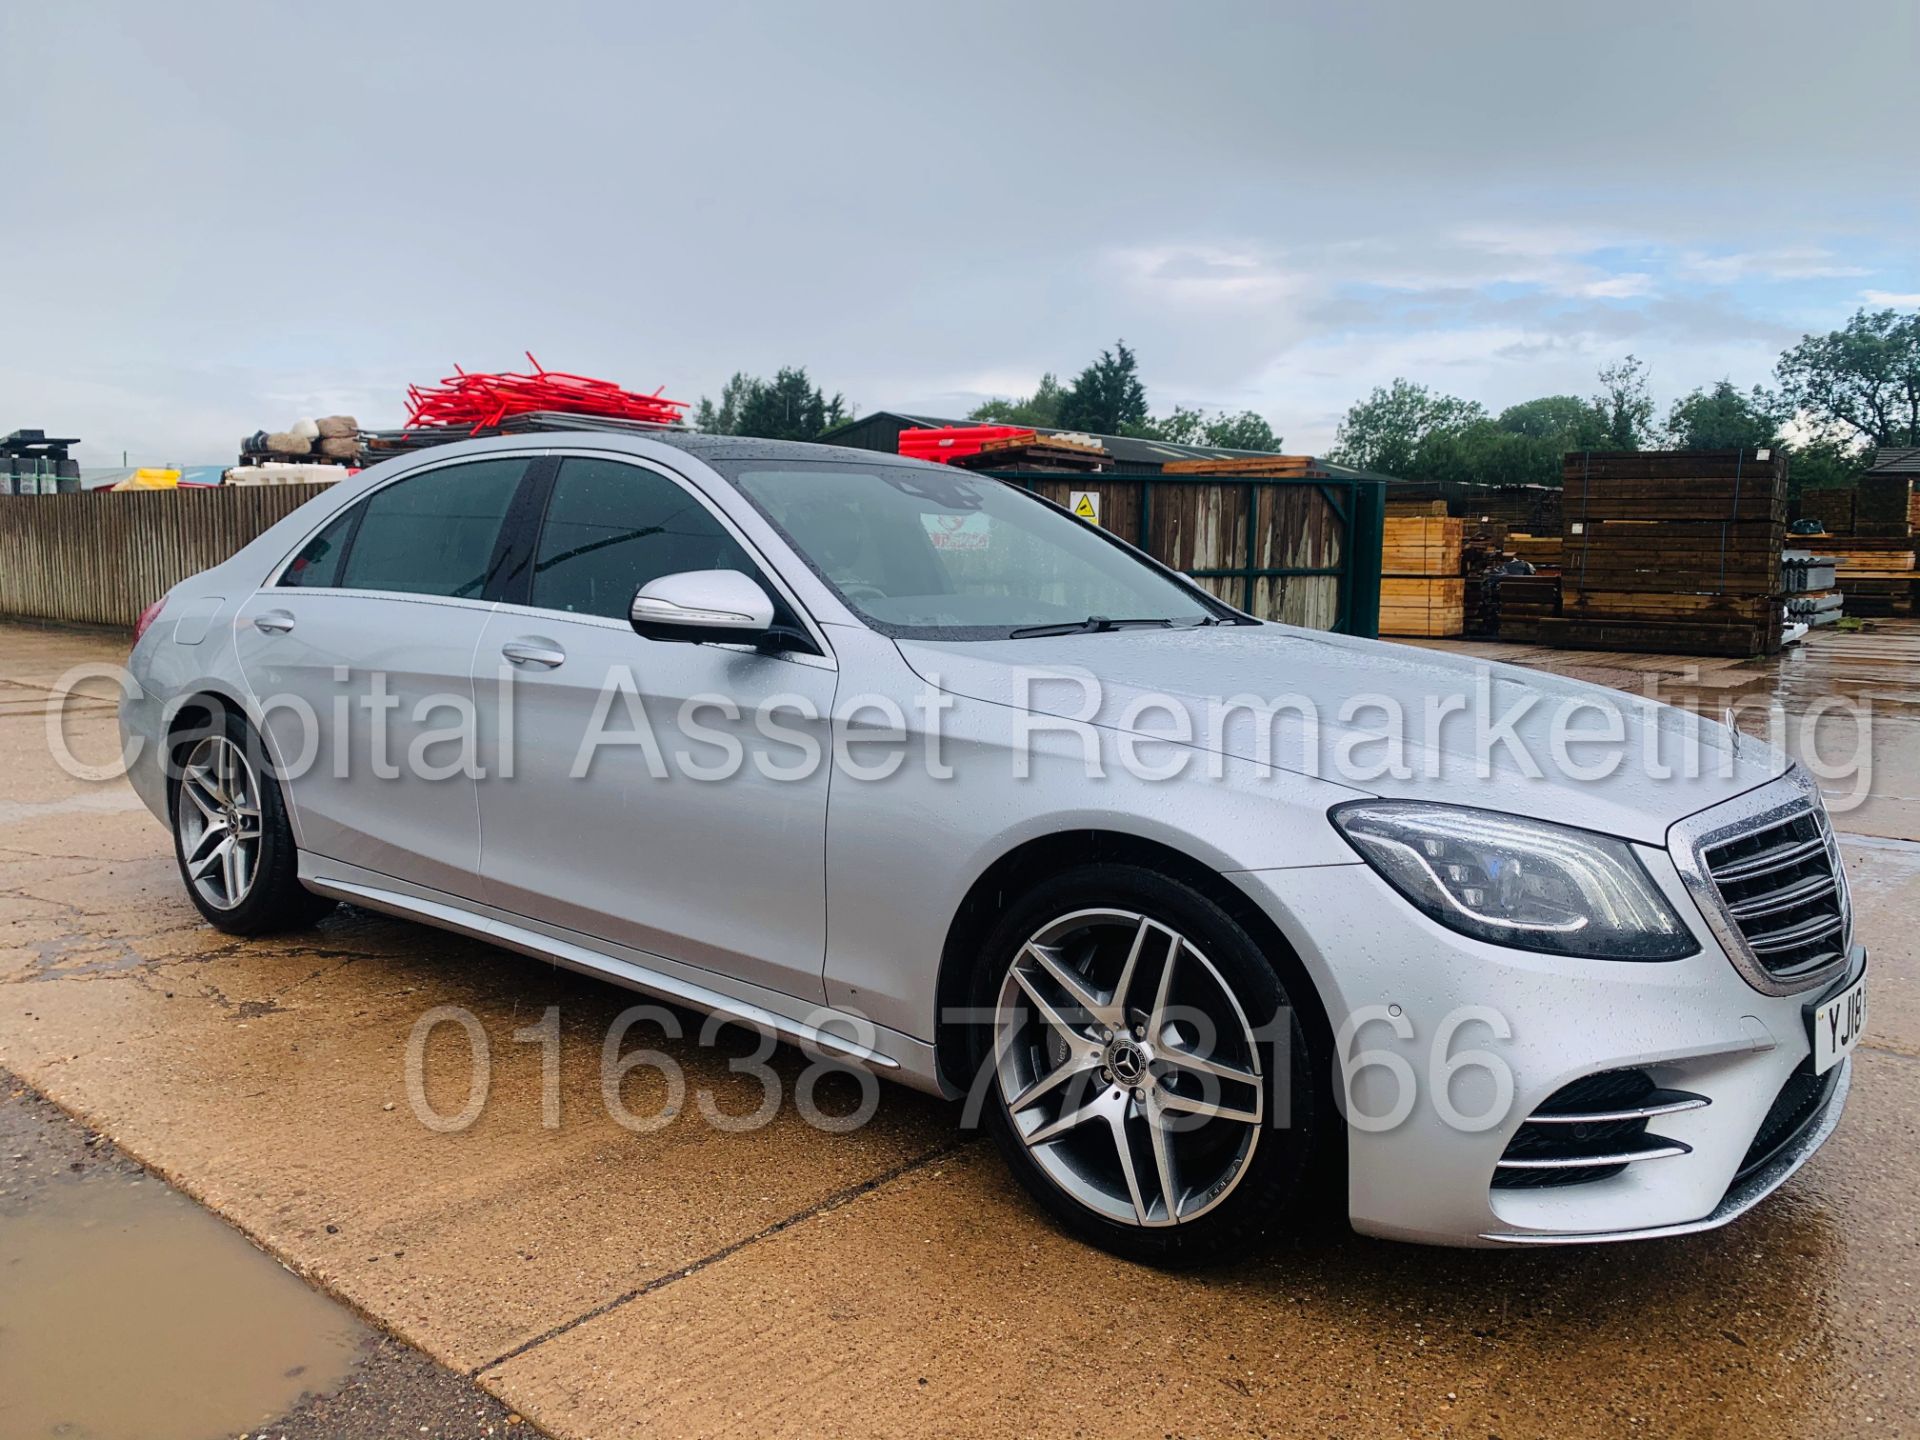 MERCEDES-BENZ S350D LWB *AMG LINE - EXECUTIVE PREMIUM SALOON* (2018) 9-G TRONIC *TOP OF THE RANGE* - Image 2 of 71